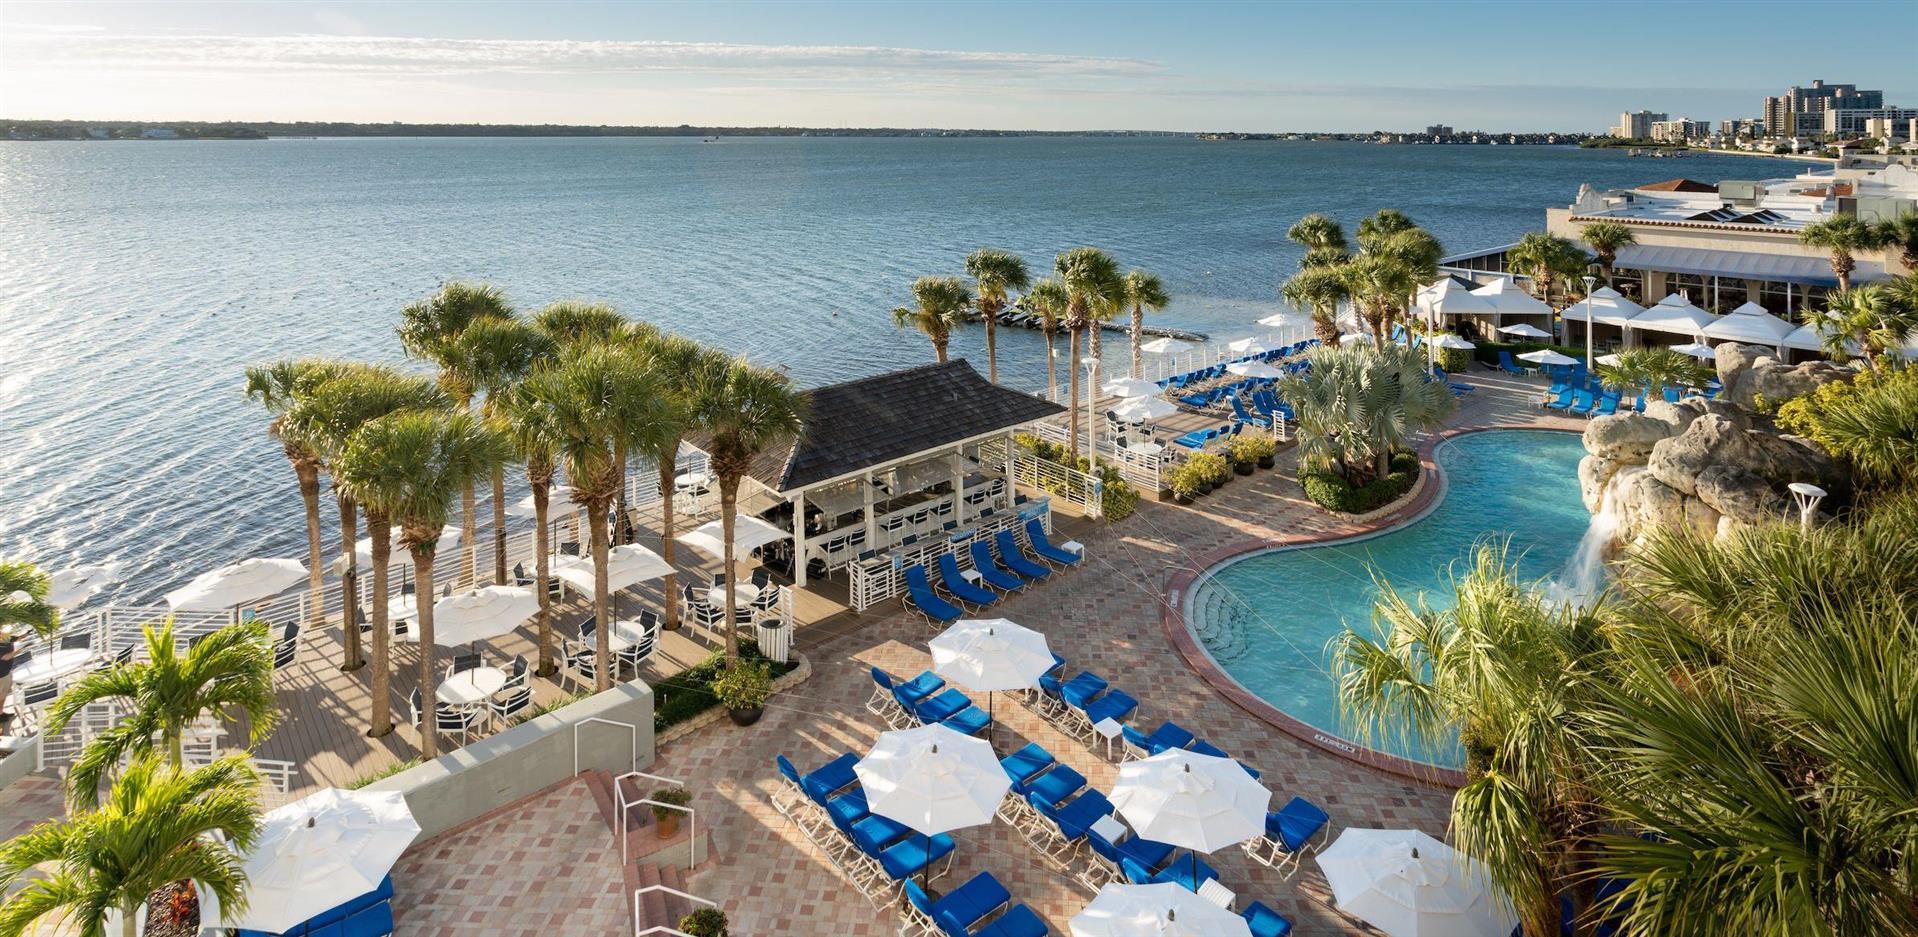 Clearwater Beach Marriott Suites on Sand Key in Clearwater Beach, FL